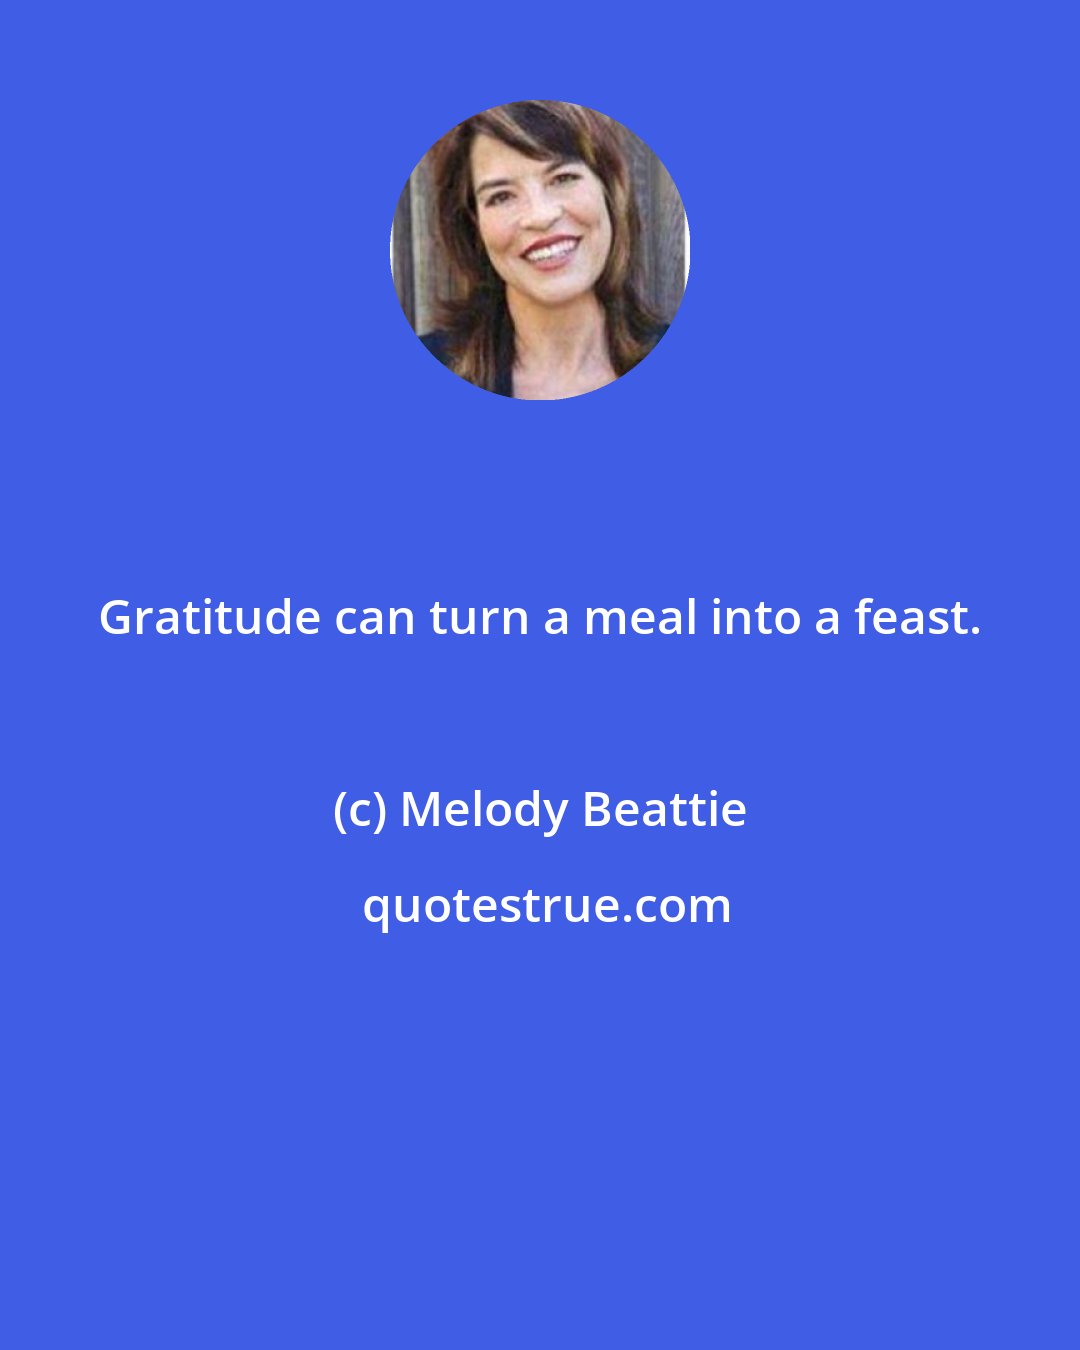 Melody Beattie: Gratitude can turn a meal into a feast.